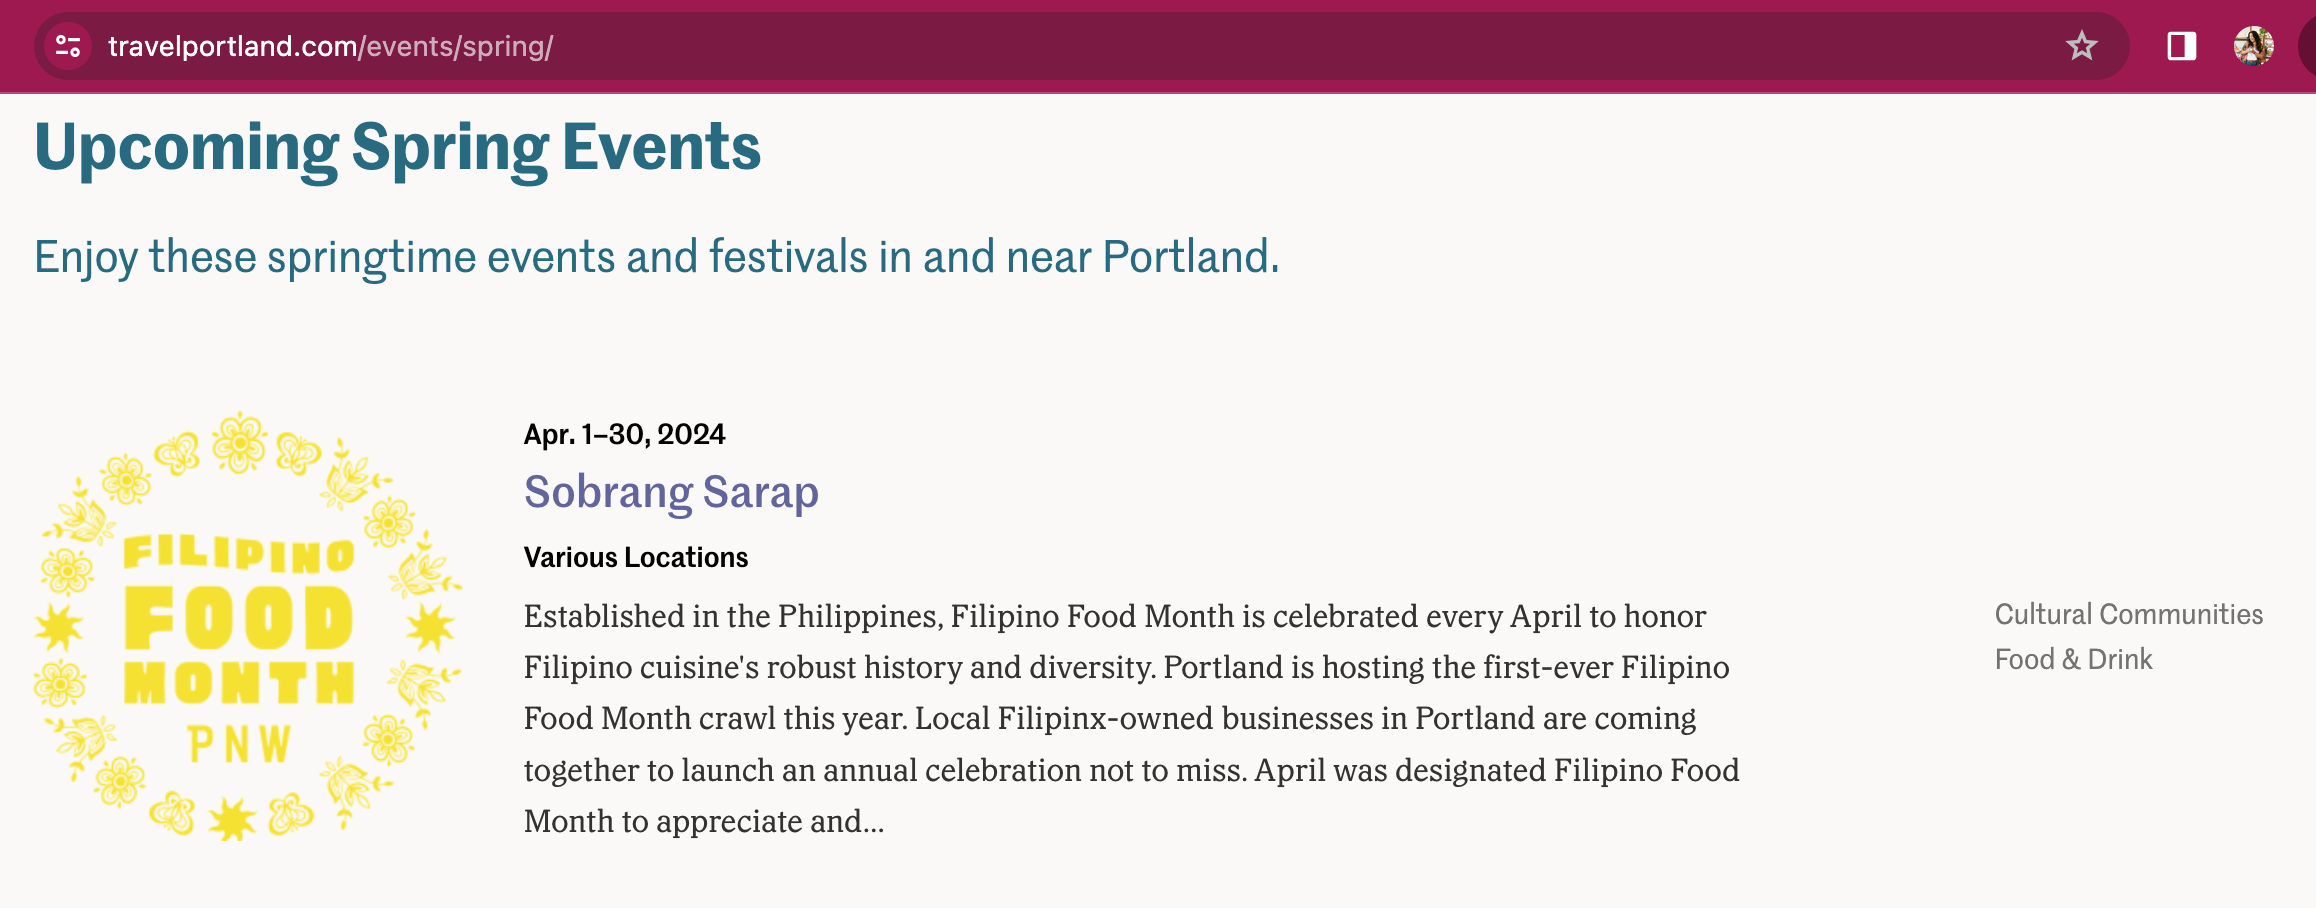 Travel Portland Events Page